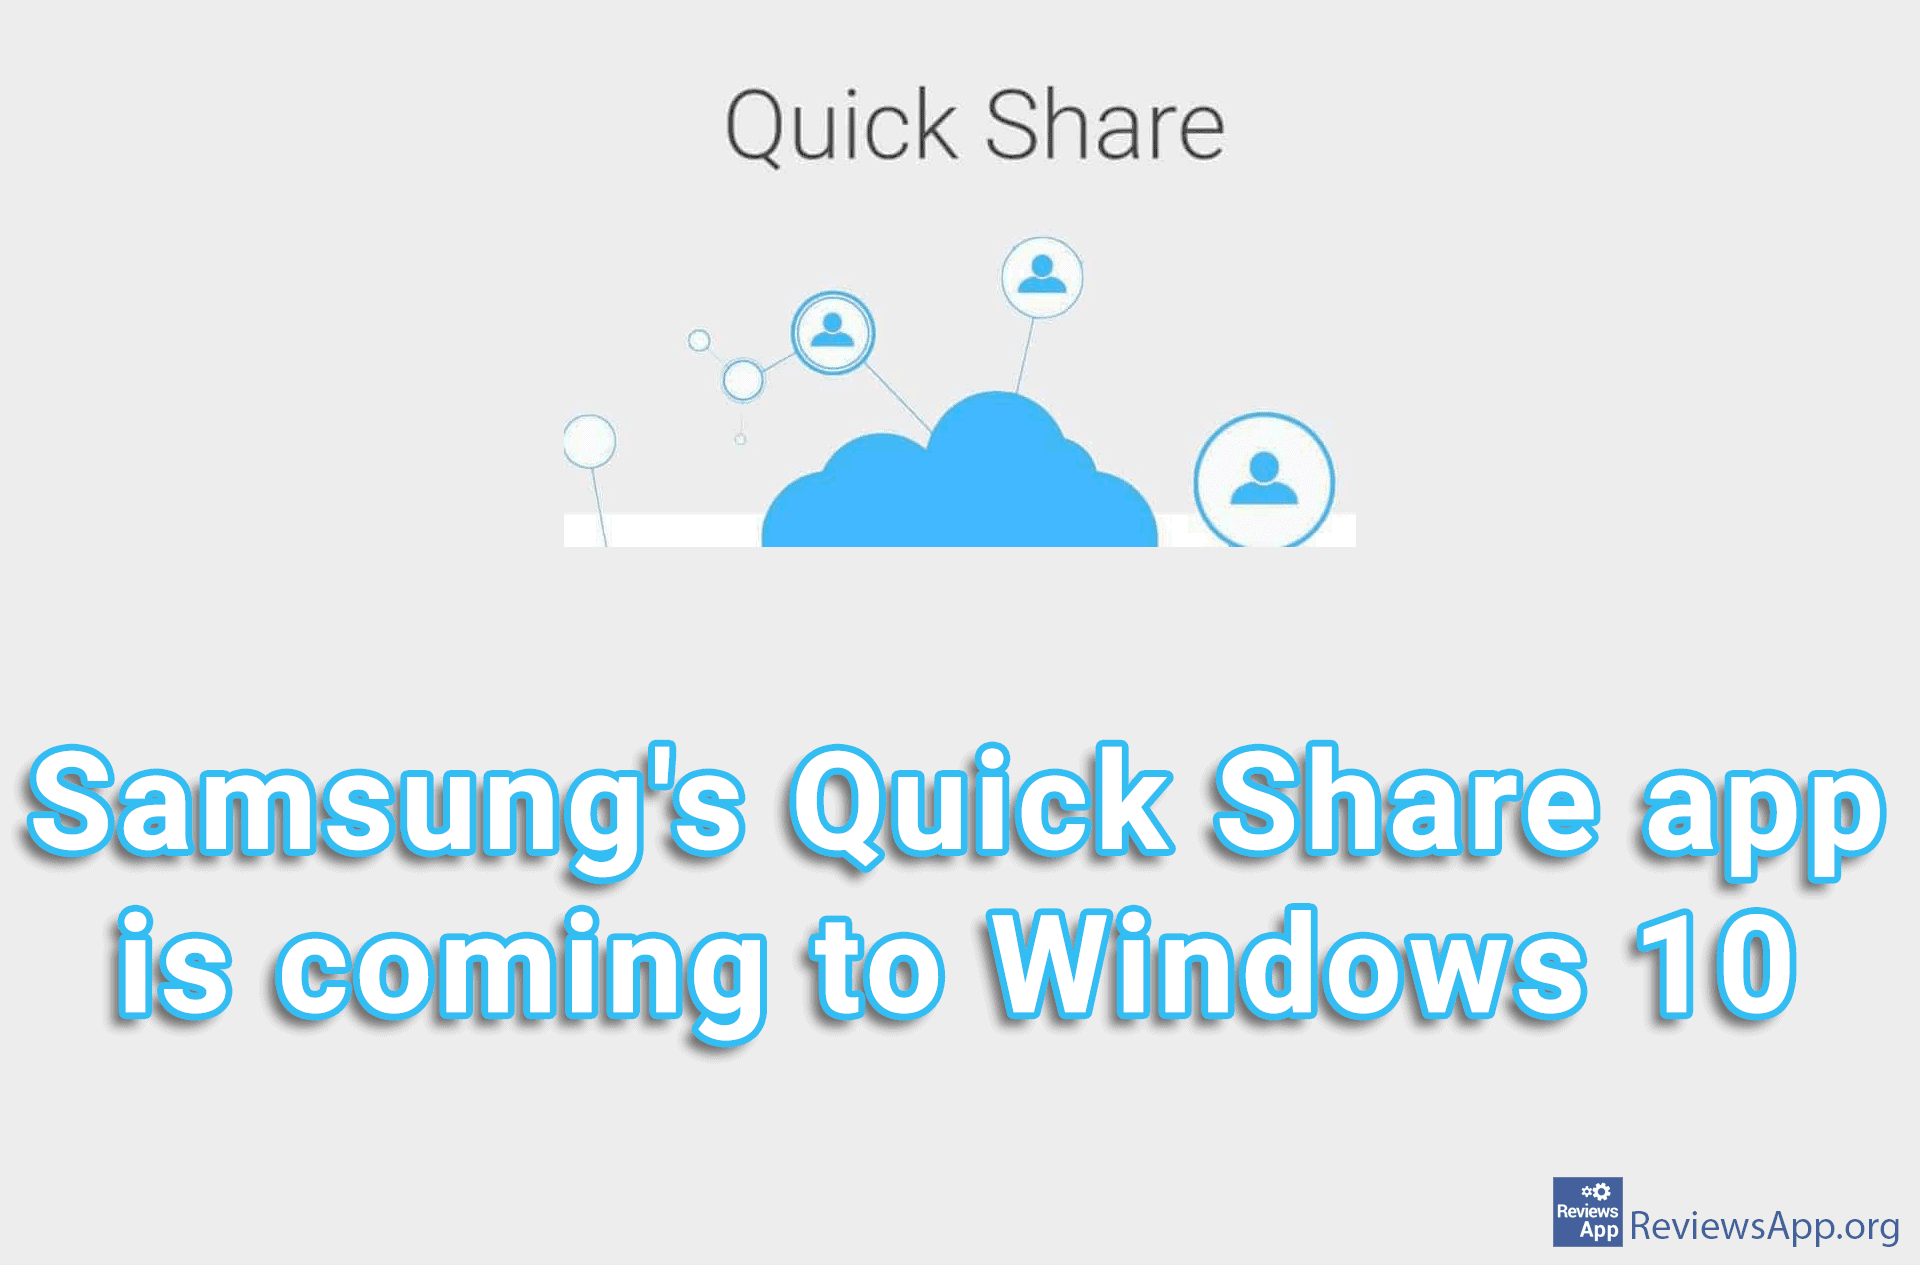 Samsung’s Quick Share app is coming to Windows 10